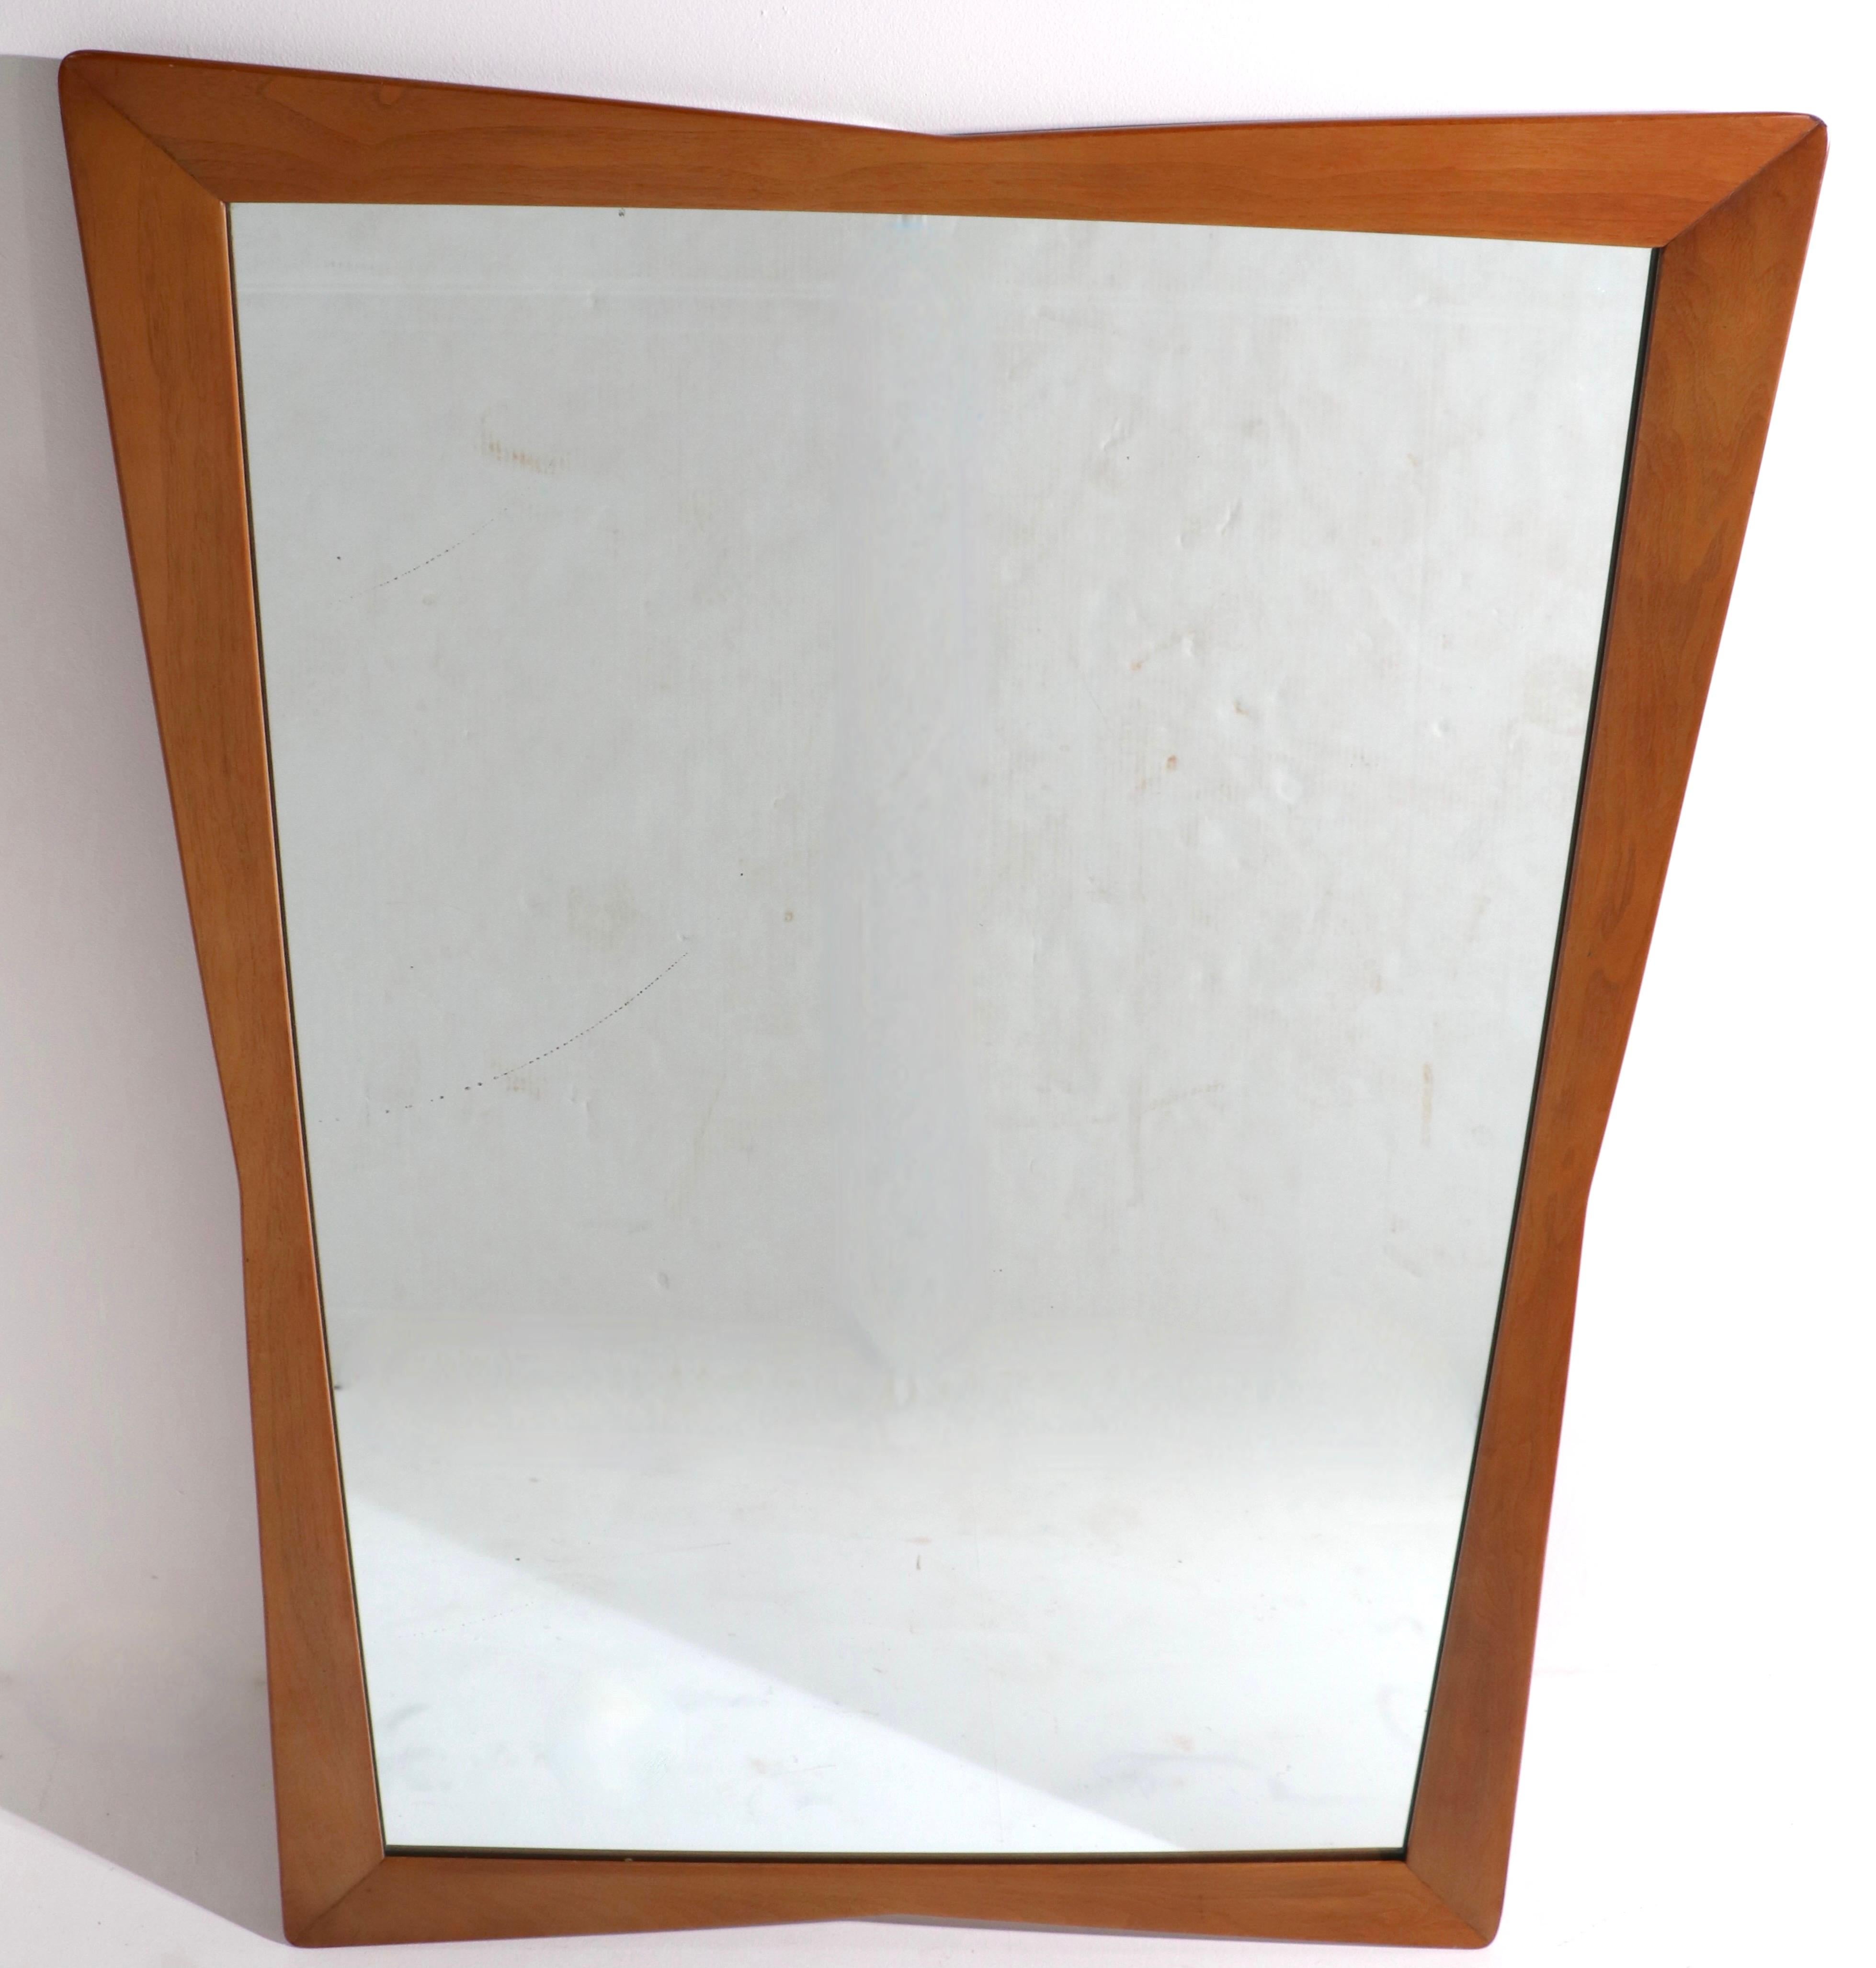 Stylish mid century wall mirror designed by Kent Coffey from The Sequence series. The solid walnut frame is of waisted form, becoming more narrow towards the middle, then widening at the outside edges. Nice large scale makes this impressive mirror